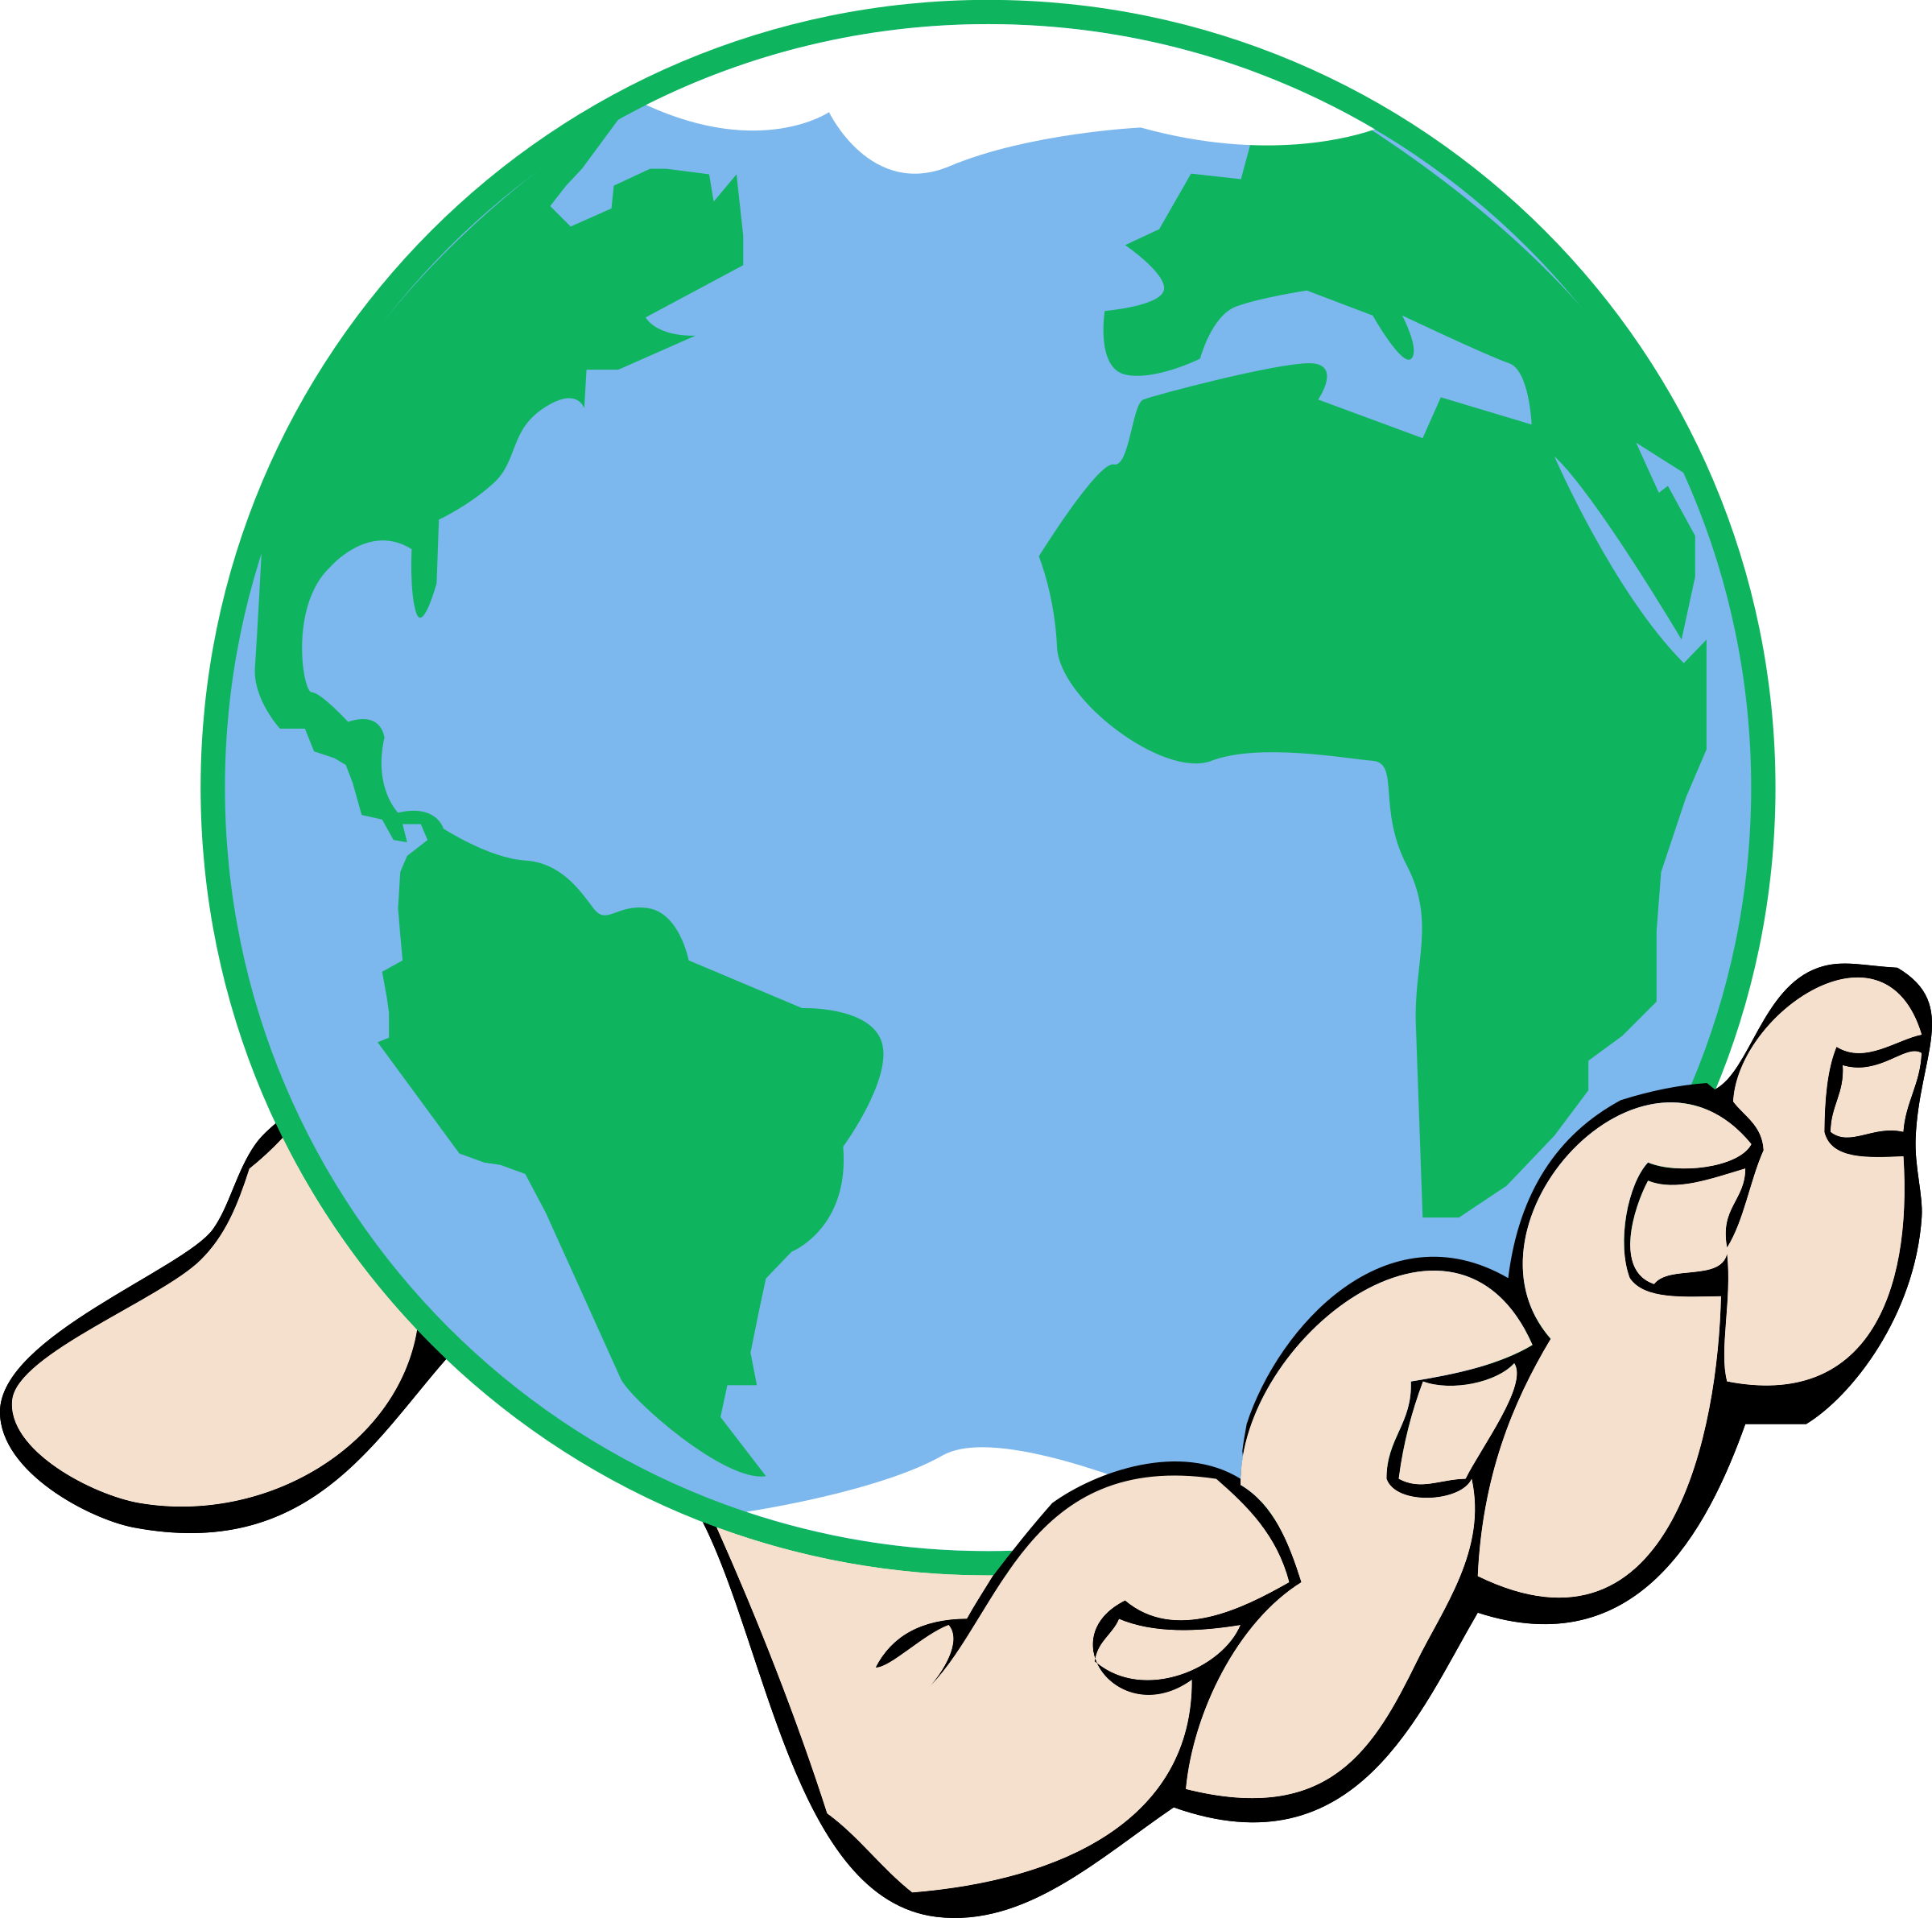 World clip art globe with hands free clipart images 2 - Cliparting.com